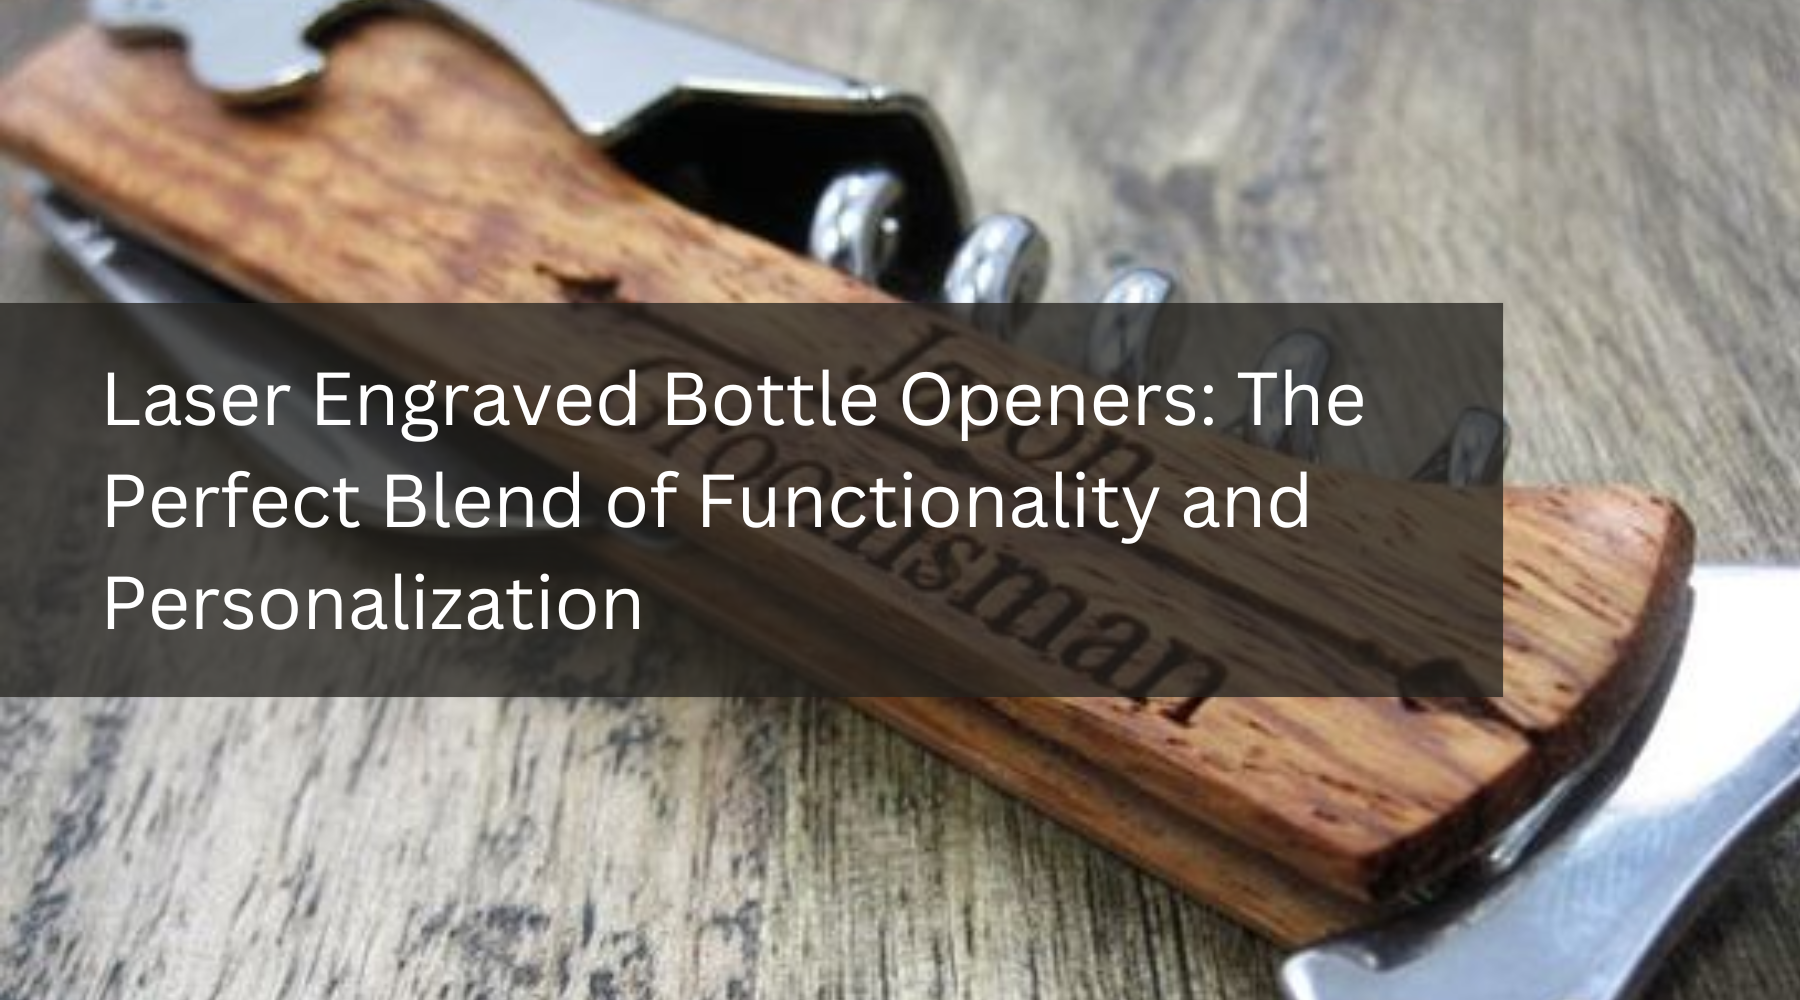 Laser Engraved Bottle Openers: The Perfect Blend of Functionality and Personalization